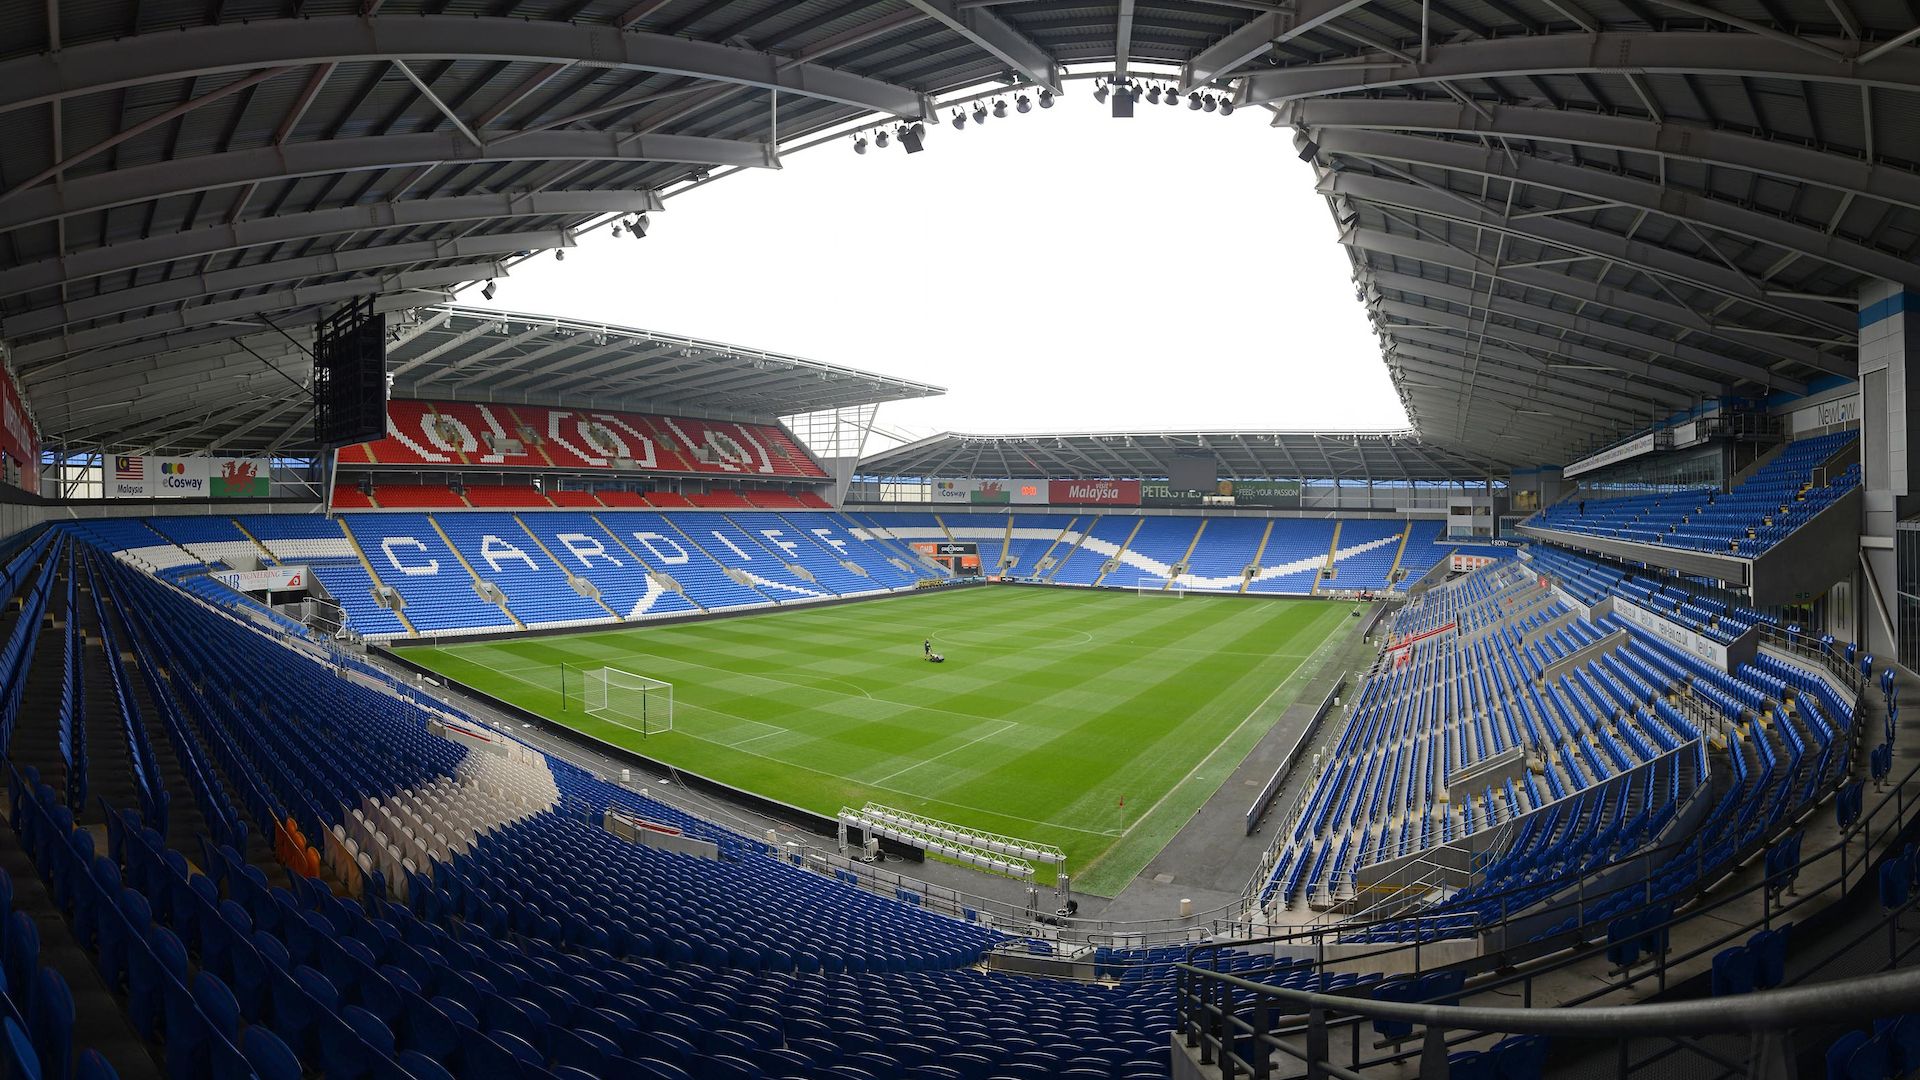 Cardiff City Stadium, home to Cardiff City, Wales - Football Ground Map